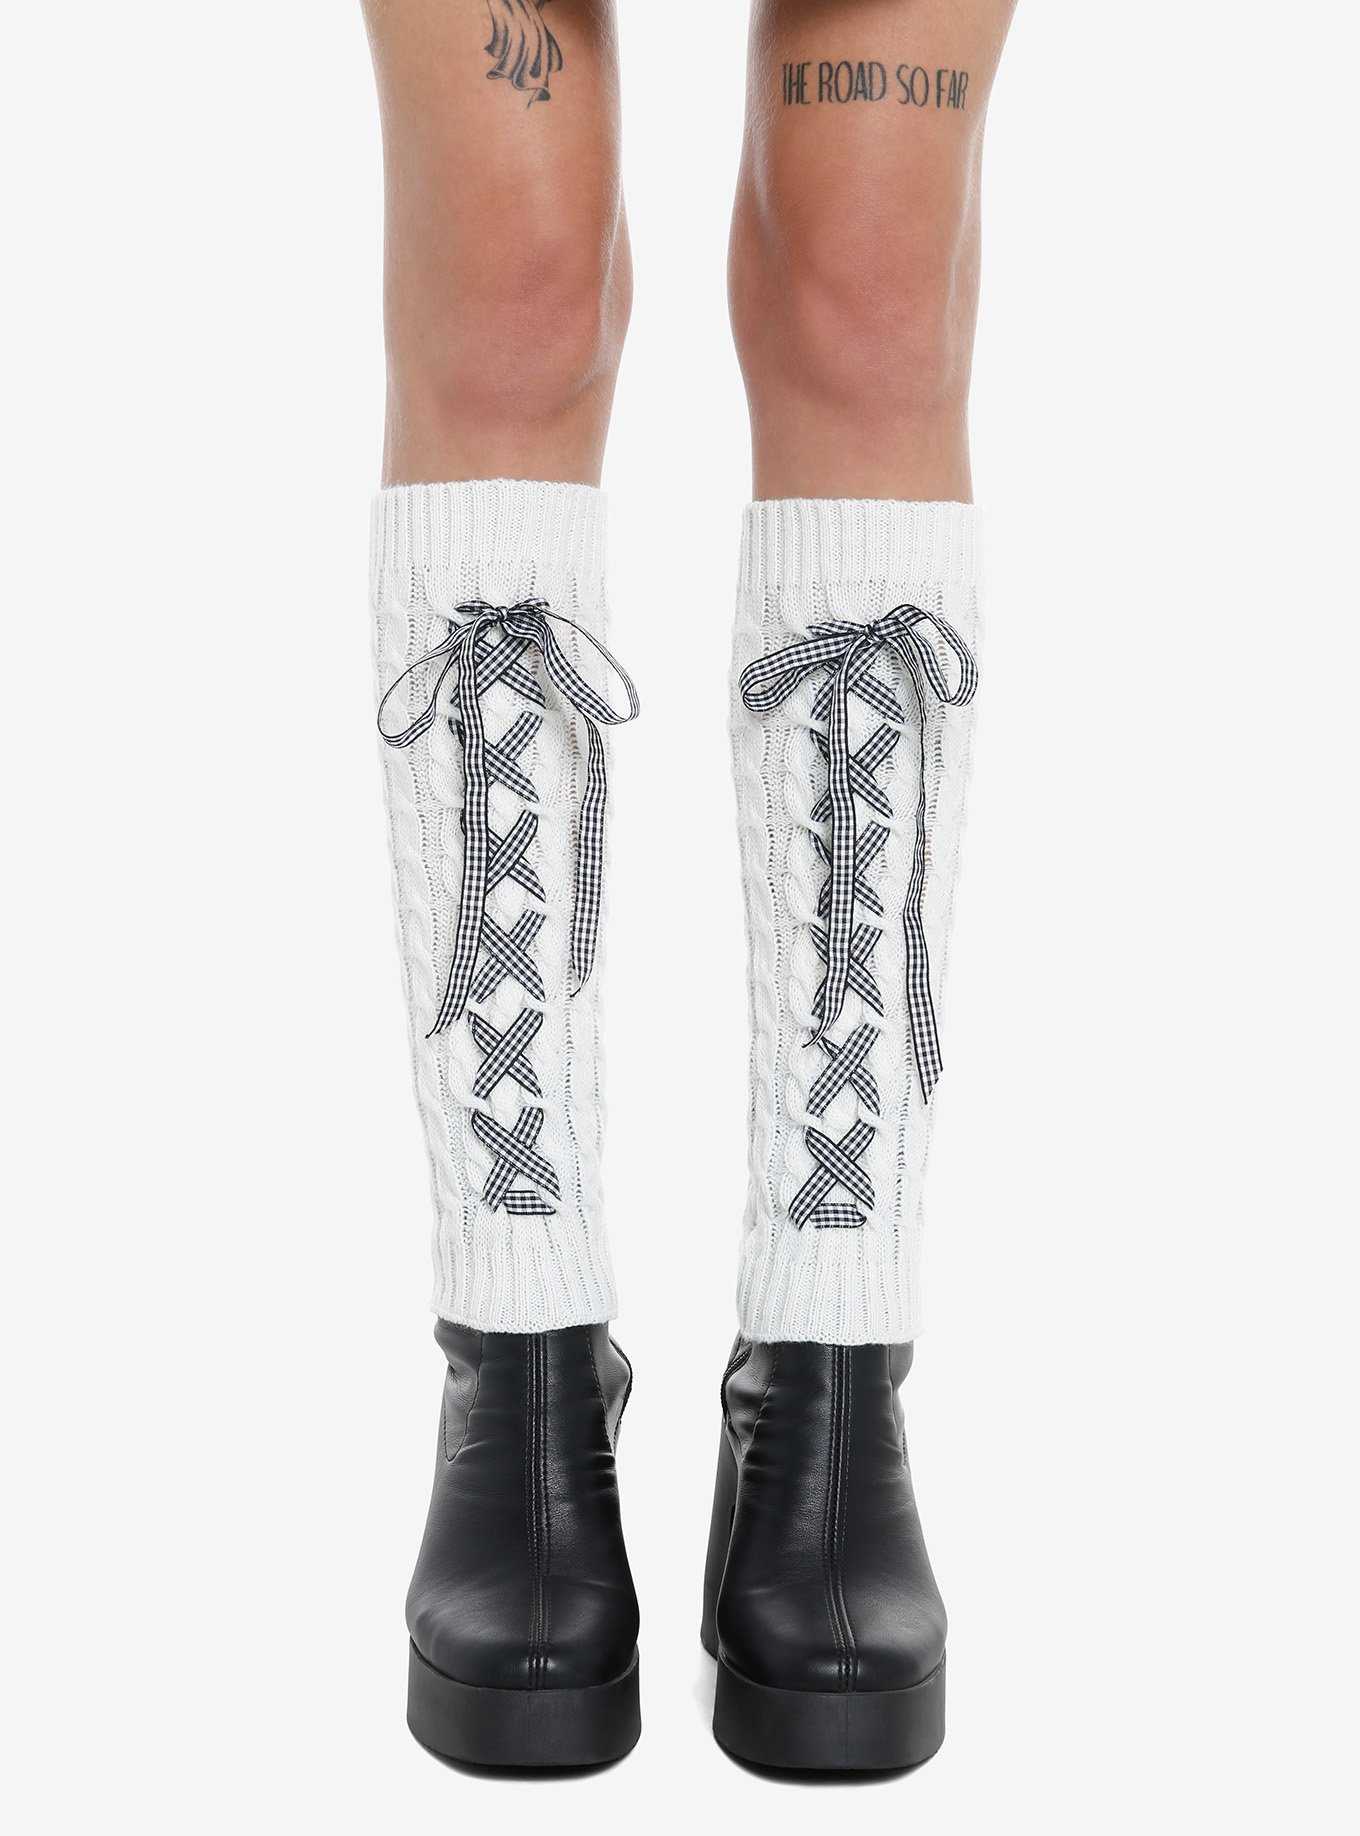 Gingham Lace-Up Cream Cable Knit Leg Warmers, , hi-res